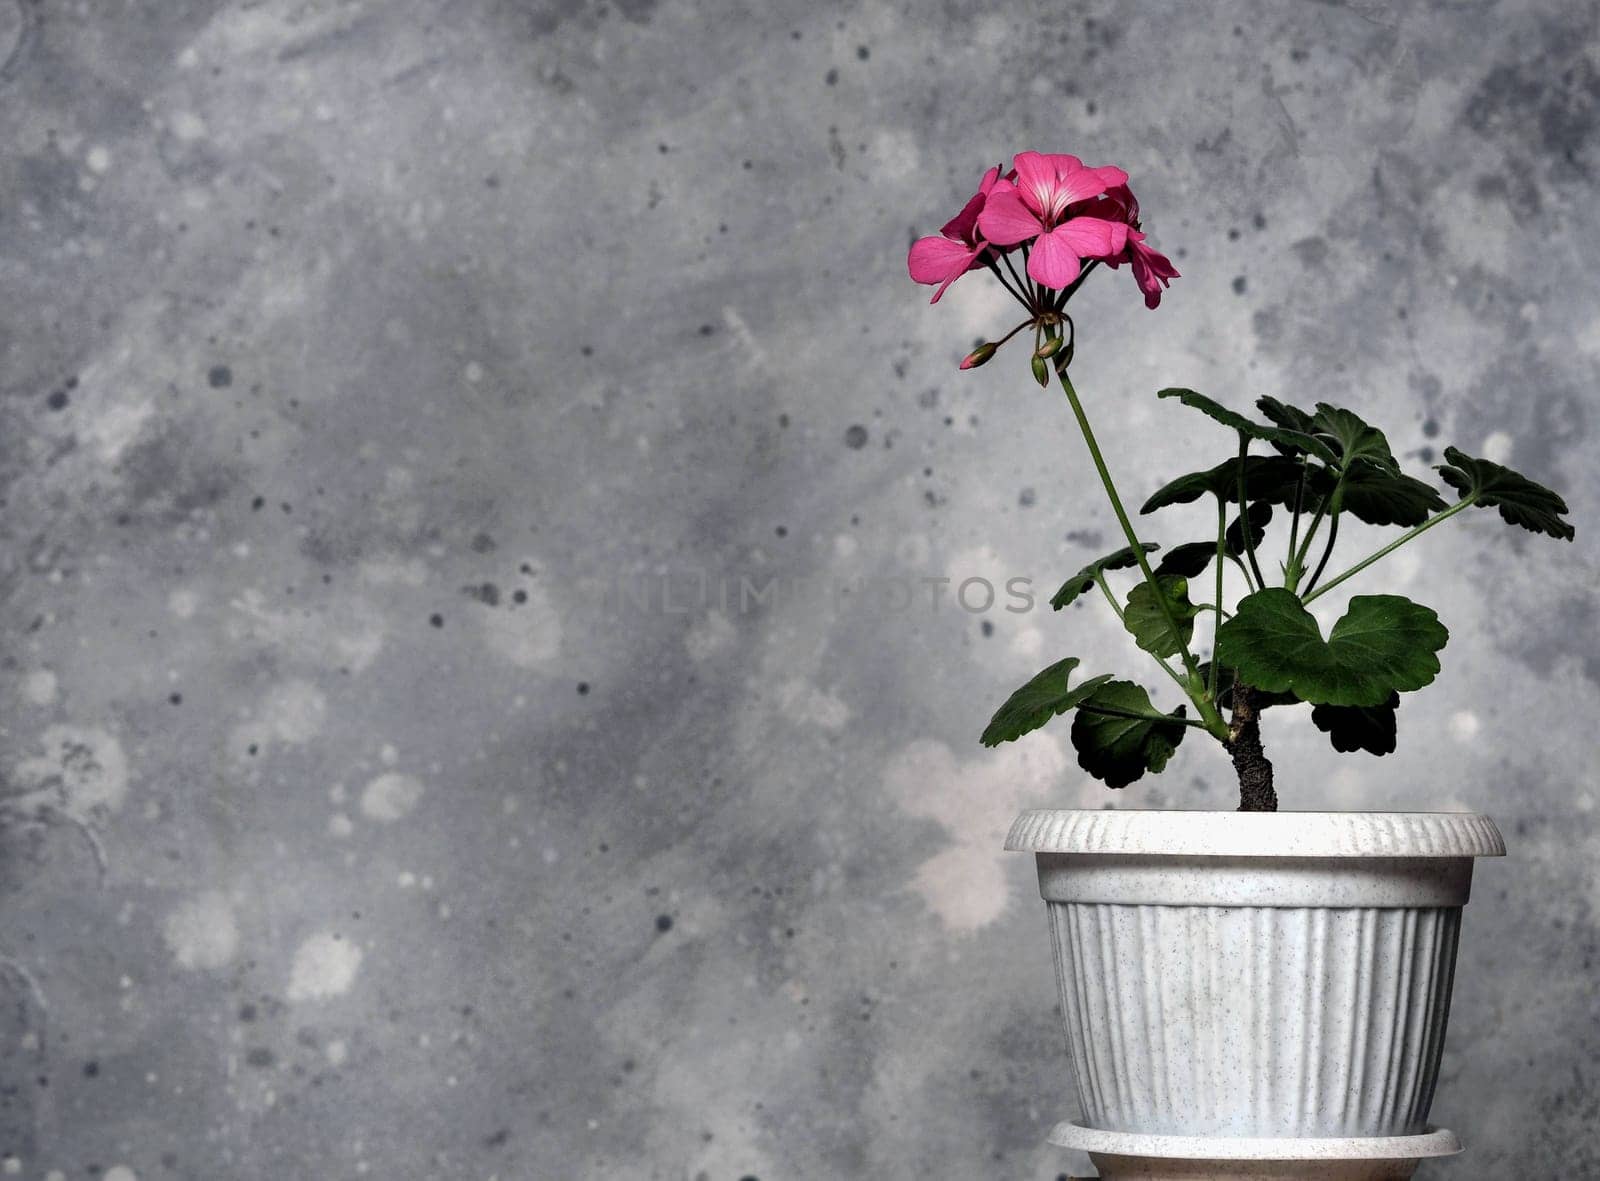 A small home plant of geranium or pelargonium with a pink flower in a flower pot on a gray background. Herbal or medicinal theme.